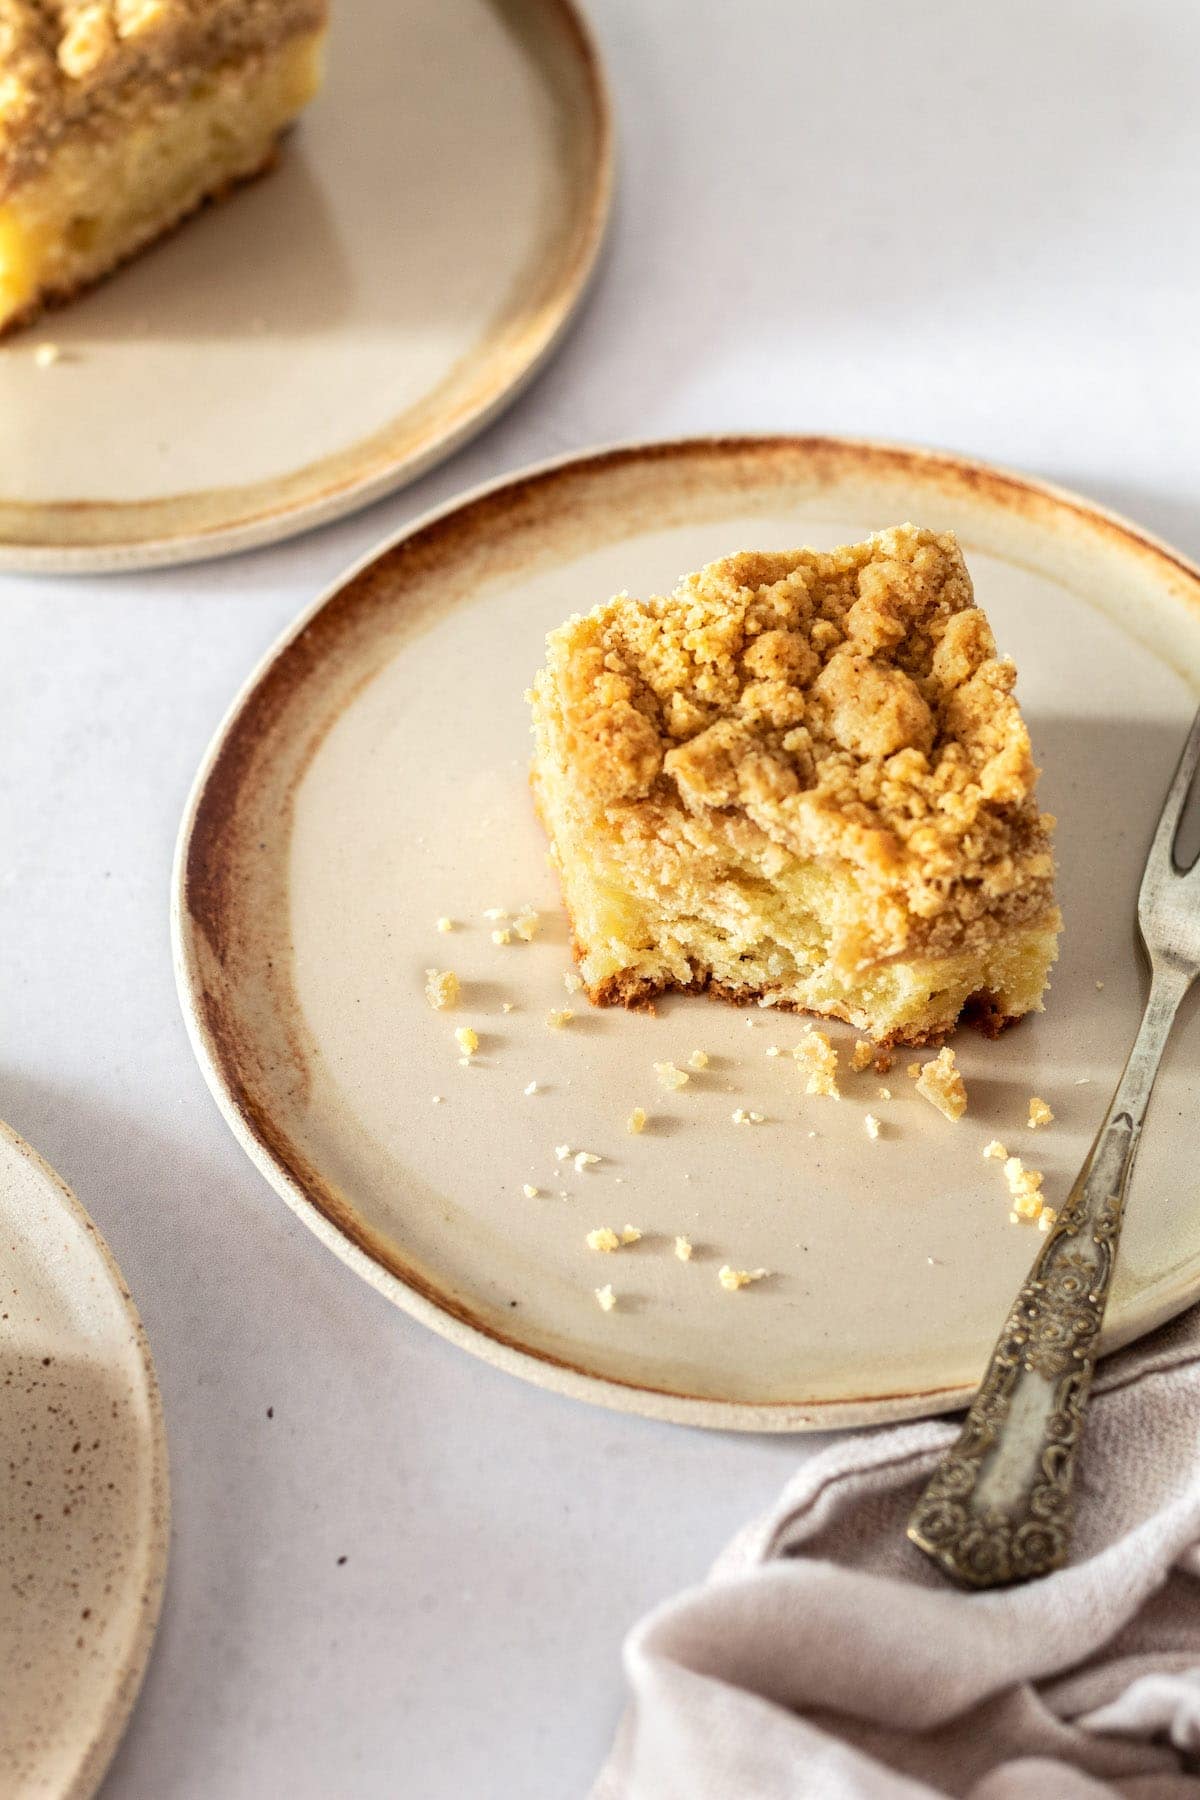 Square of crumb cake on small plate with fork